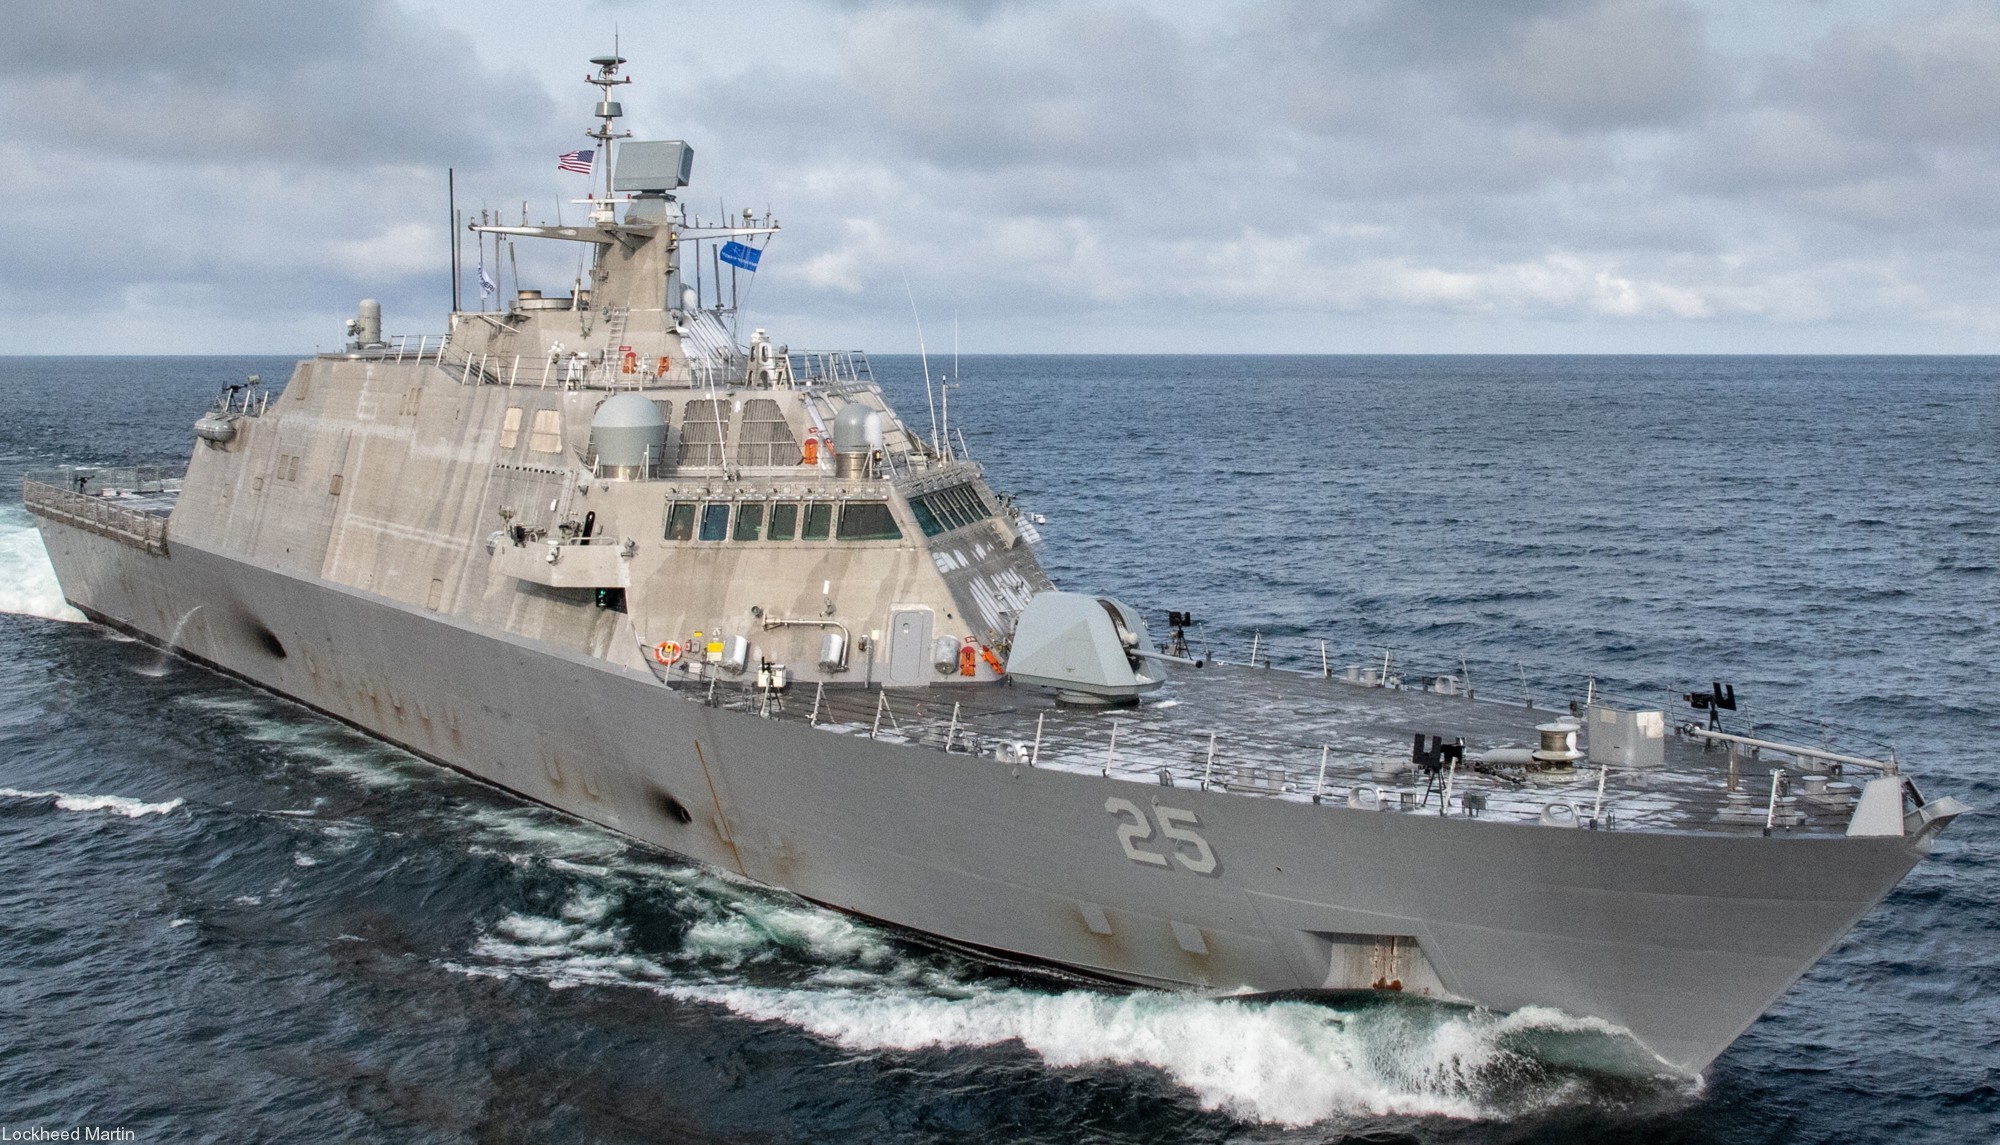 lcs-25 uss marinette freedom class littoral combat ship us navy acceptance trials 15